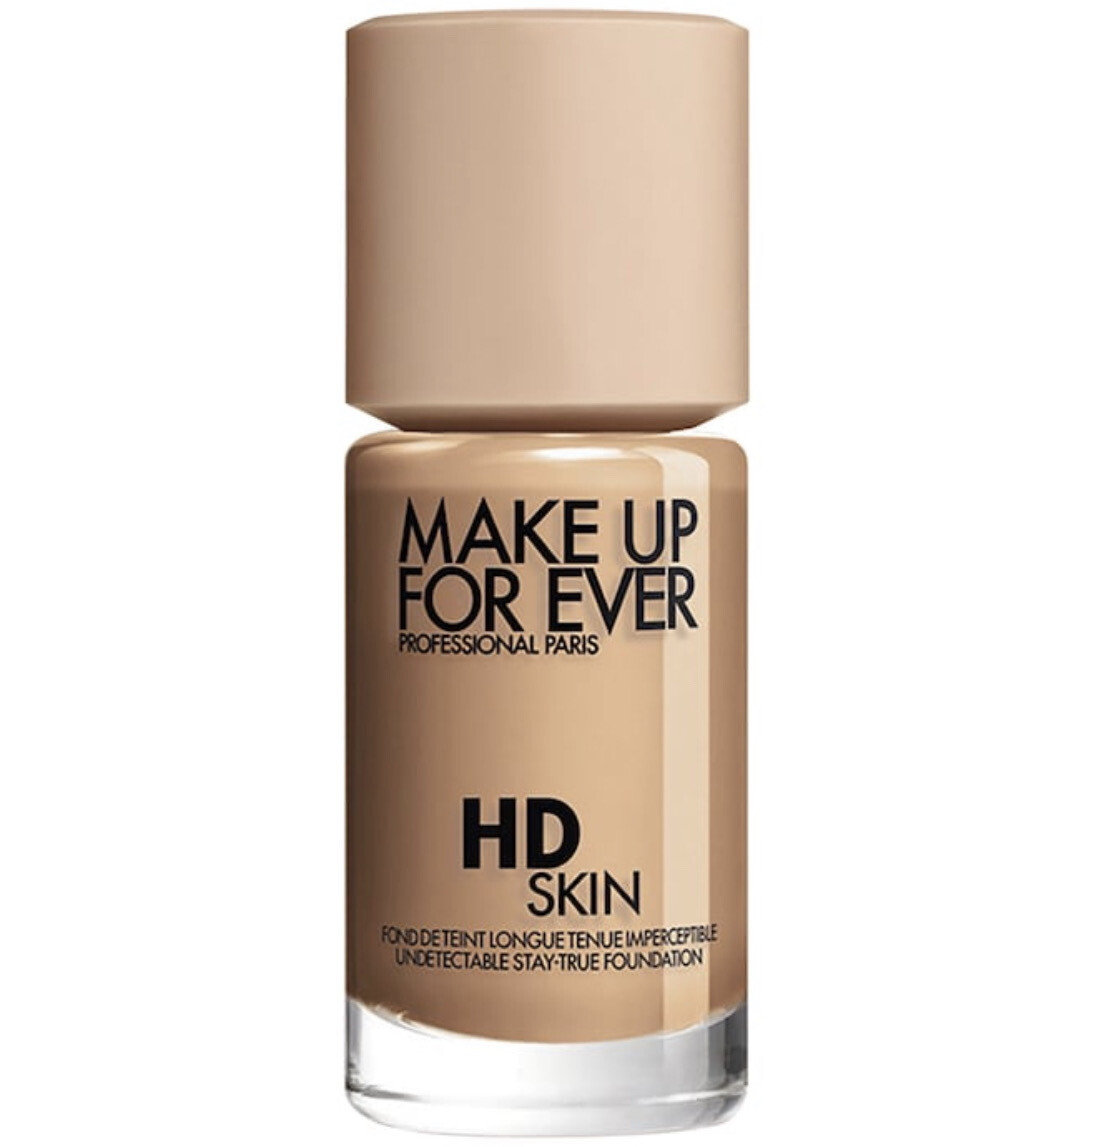 Make Up For Ever - HD Skin Undetectable Longwear Foundation | 2Y32 Warm Caramel - for medium skin tones with yellow undertones